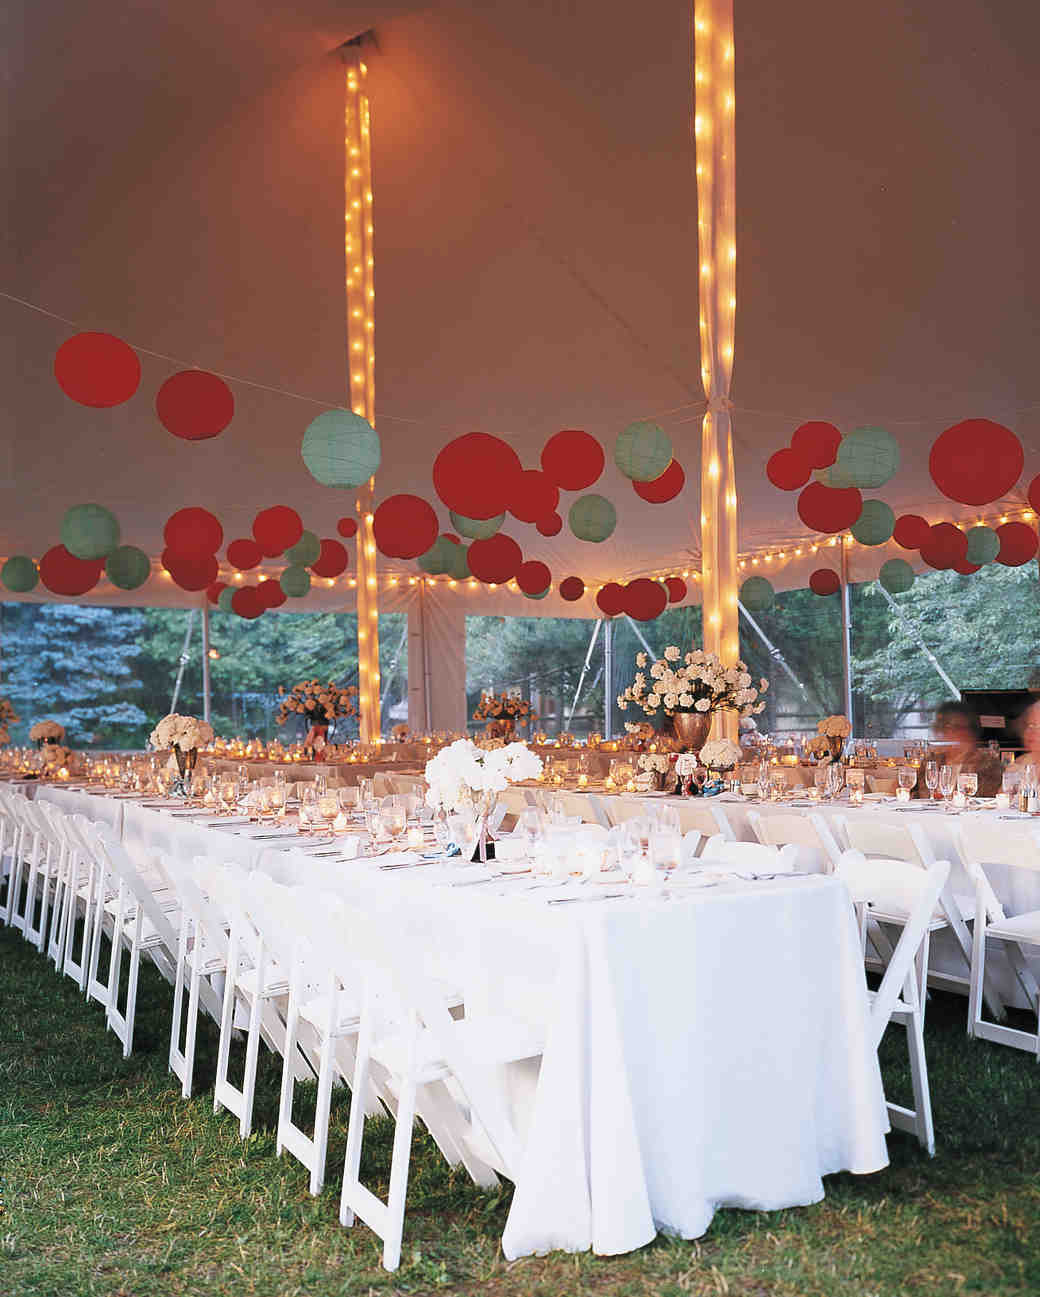 How To Decorate Wedding Reception
 33 Tent Decorating Ideas to Upgrade Your Wedding Reception